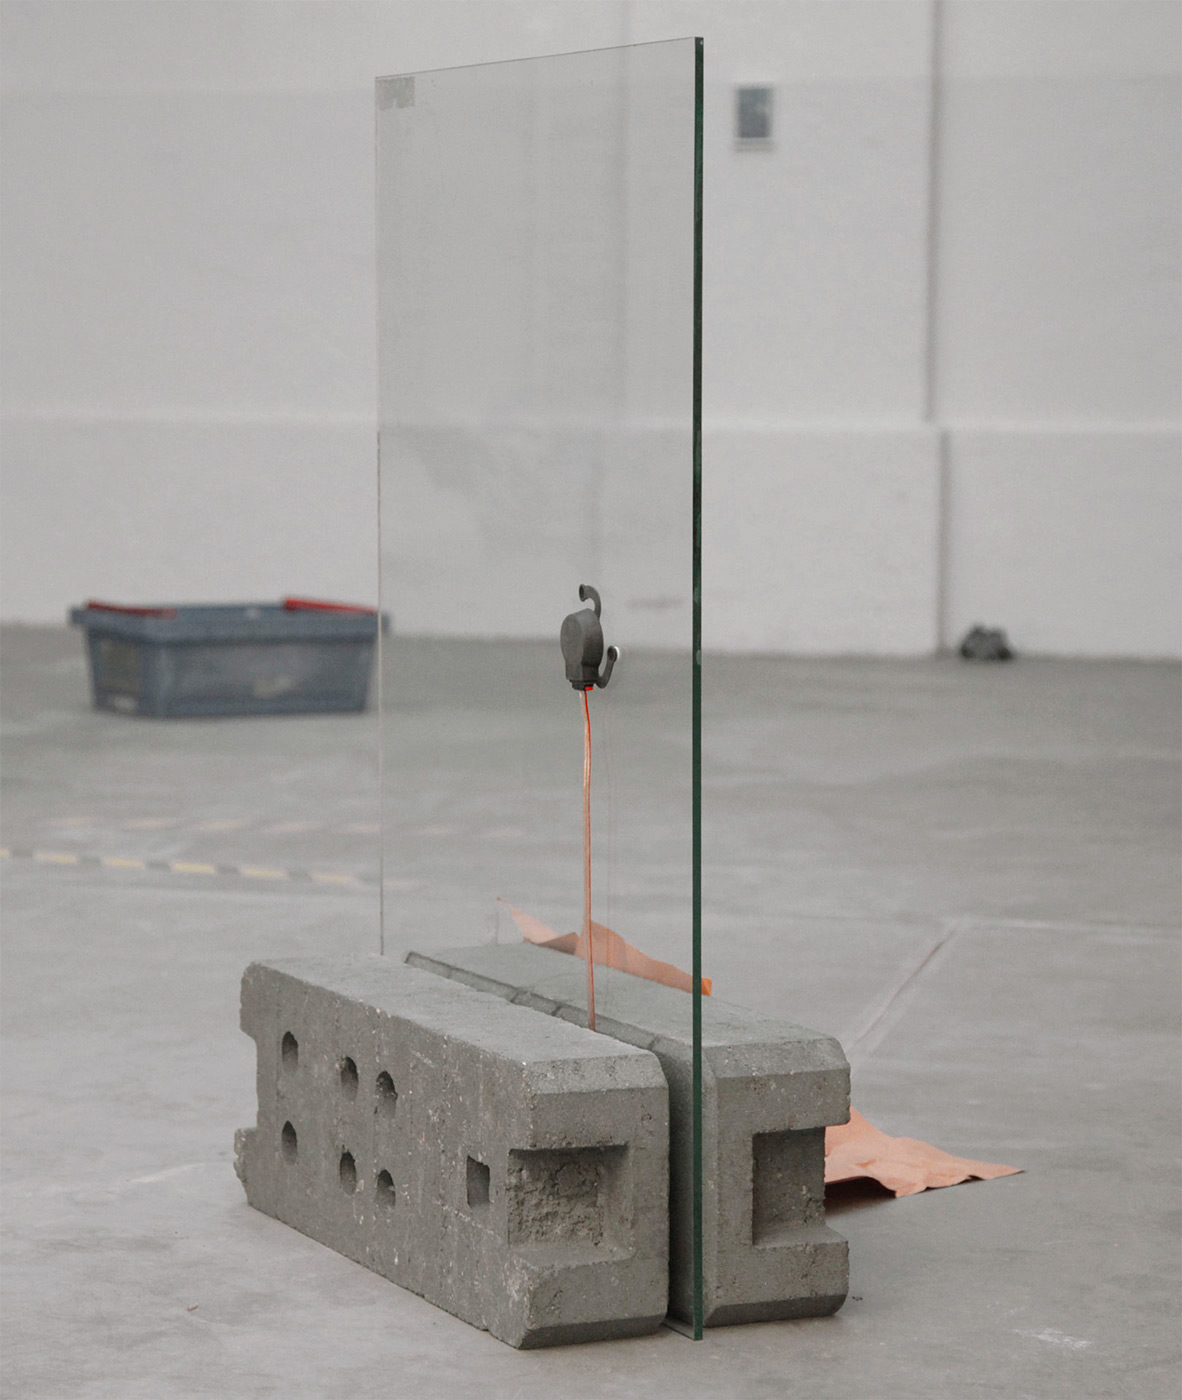 A glass pane in portrait format, to which an audio exciter is attached. The glass pane is held to the floor by two construction fence weights.